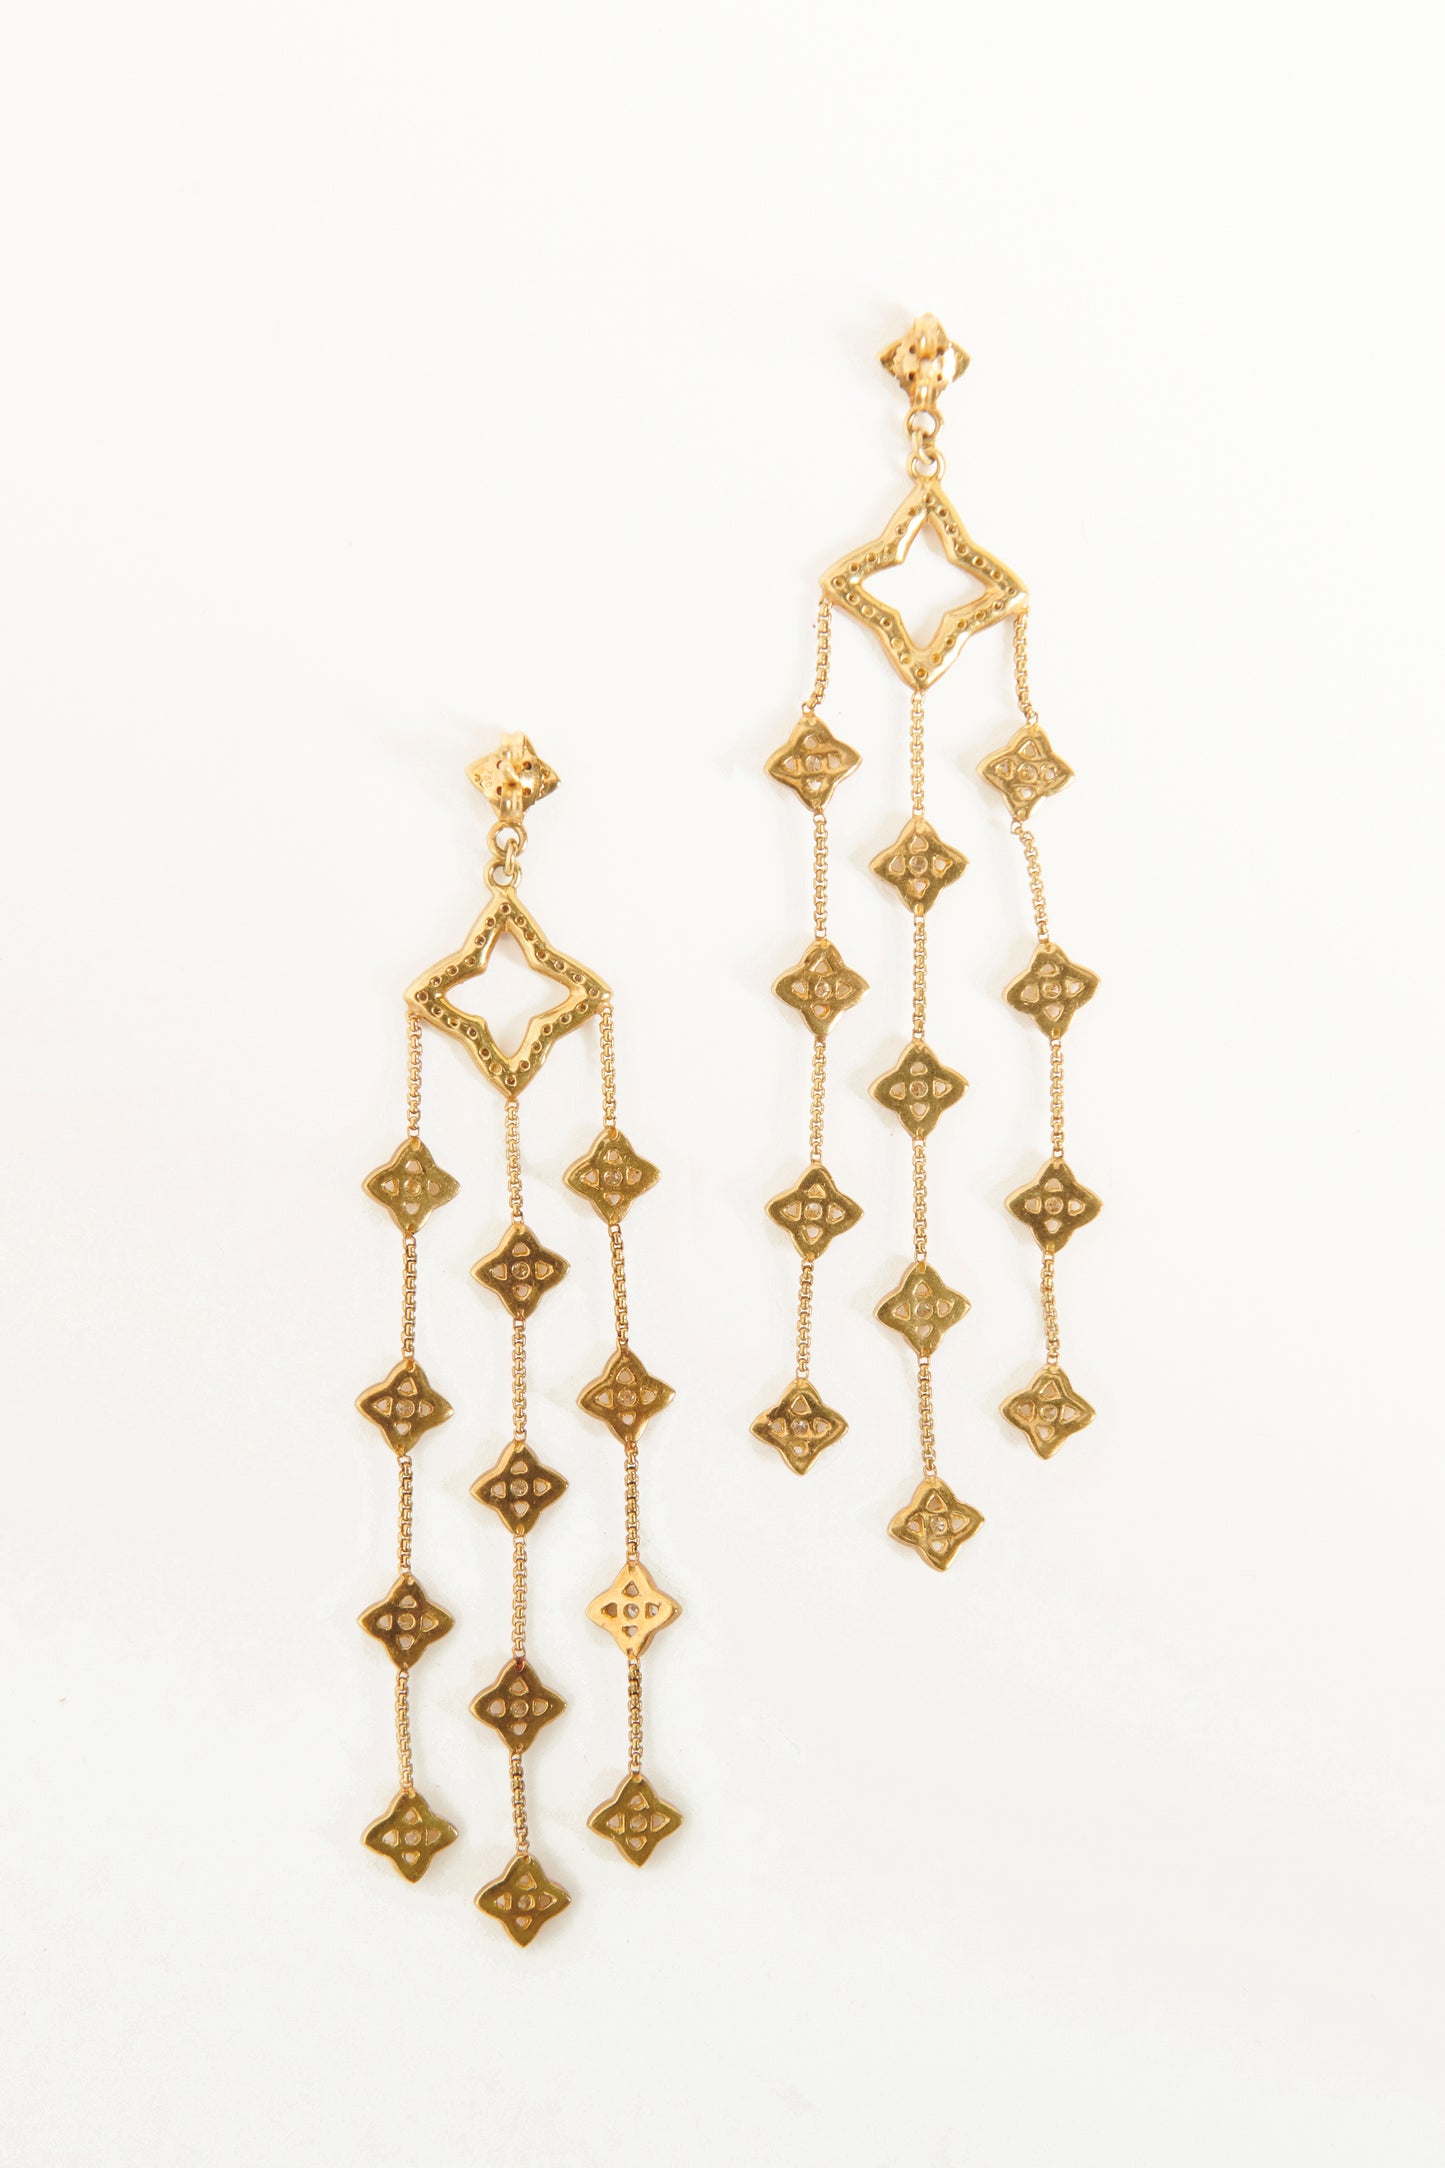 18K Yellow Gold Preowned Quatrefoil Chain earrings